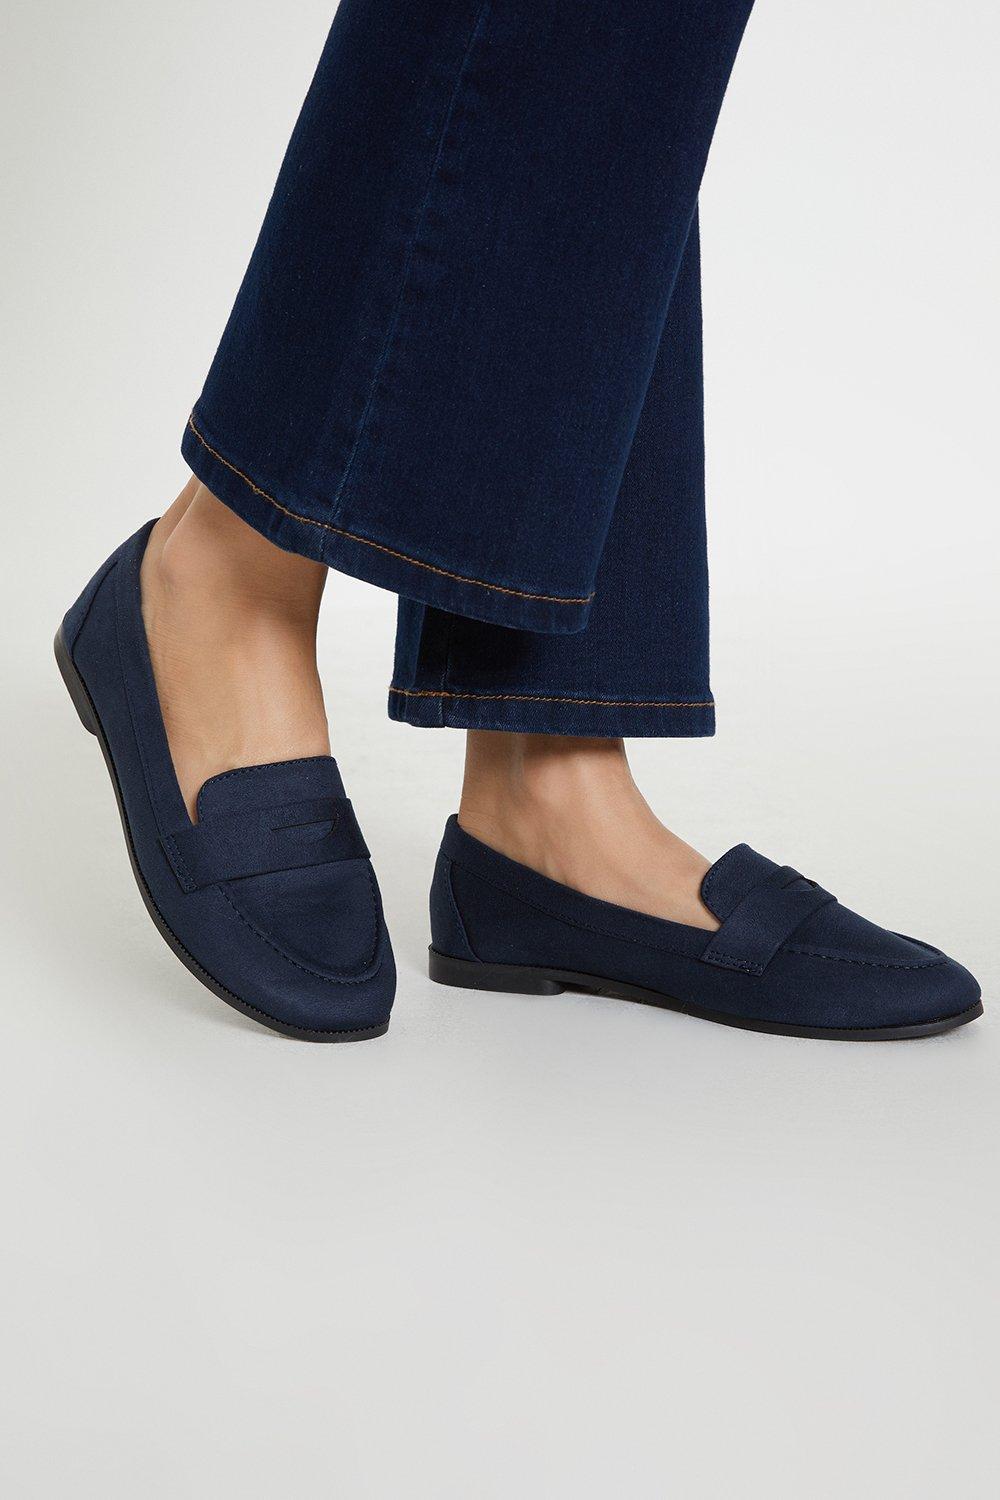 Women’s Wide Fit Lana Penny Loafers - navy - 8